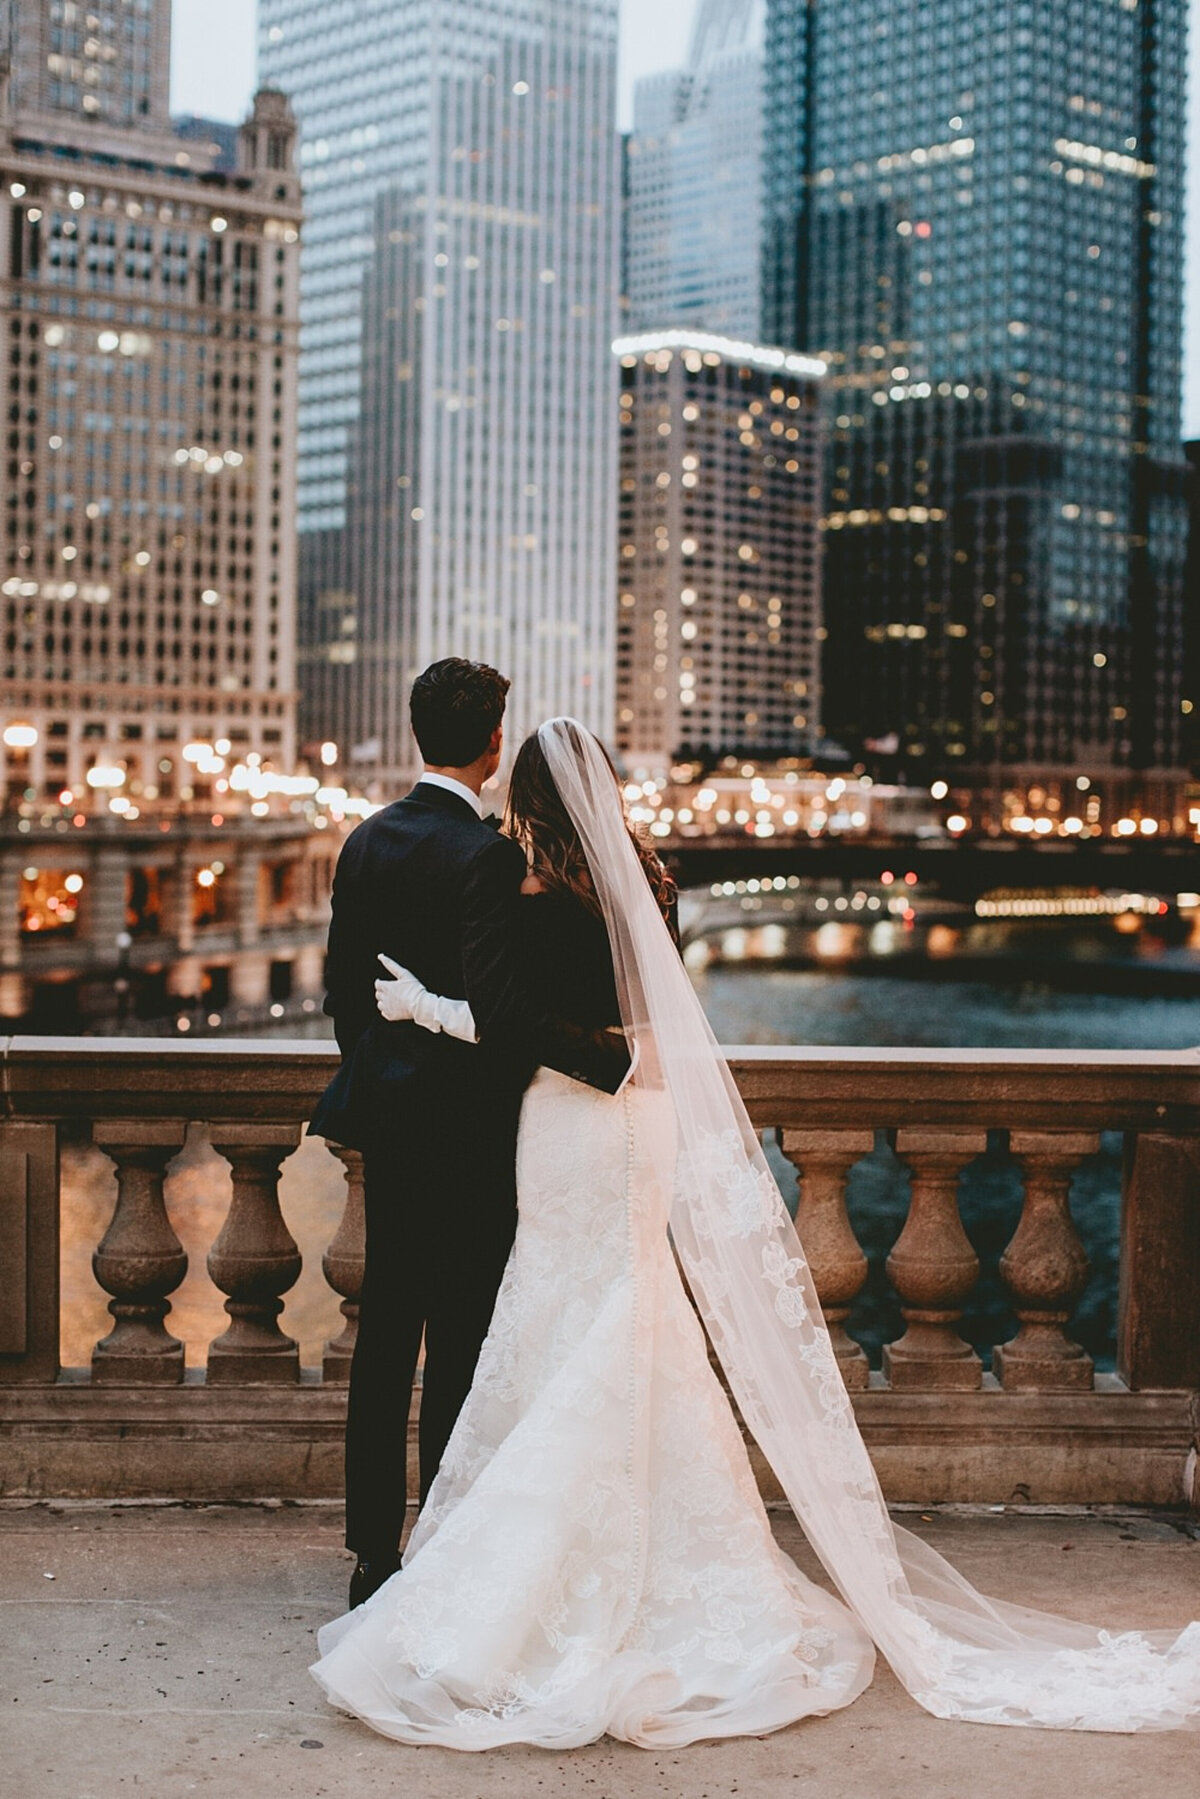 Bride and groom embracing and overlooking downtown Chicago